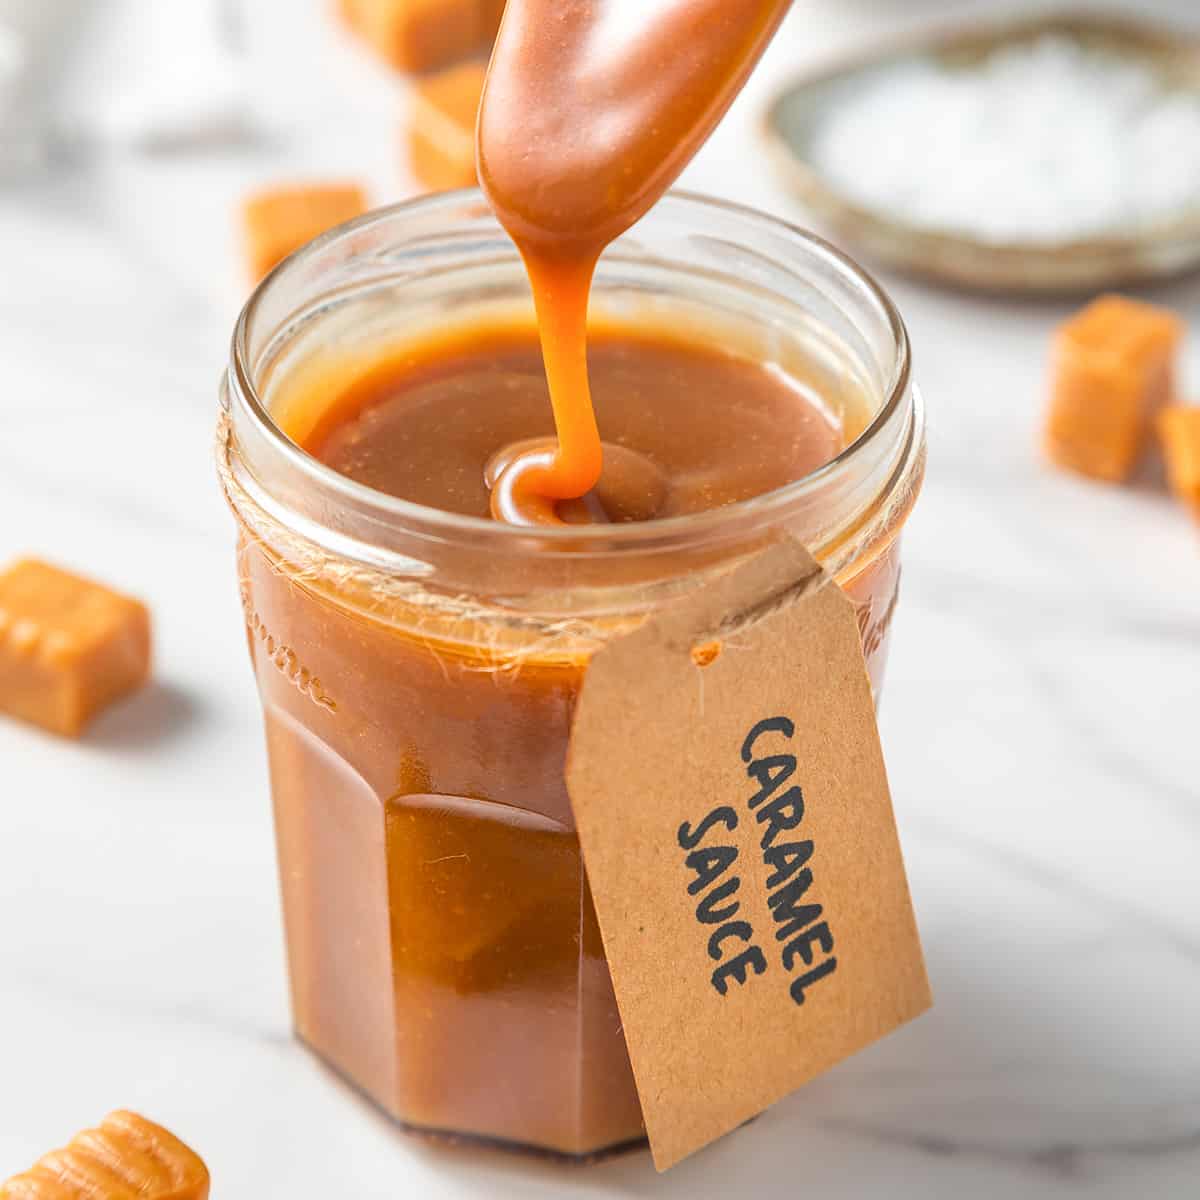 a spoon drizzling some caramel sauce into a jar of caramel sauce with a label